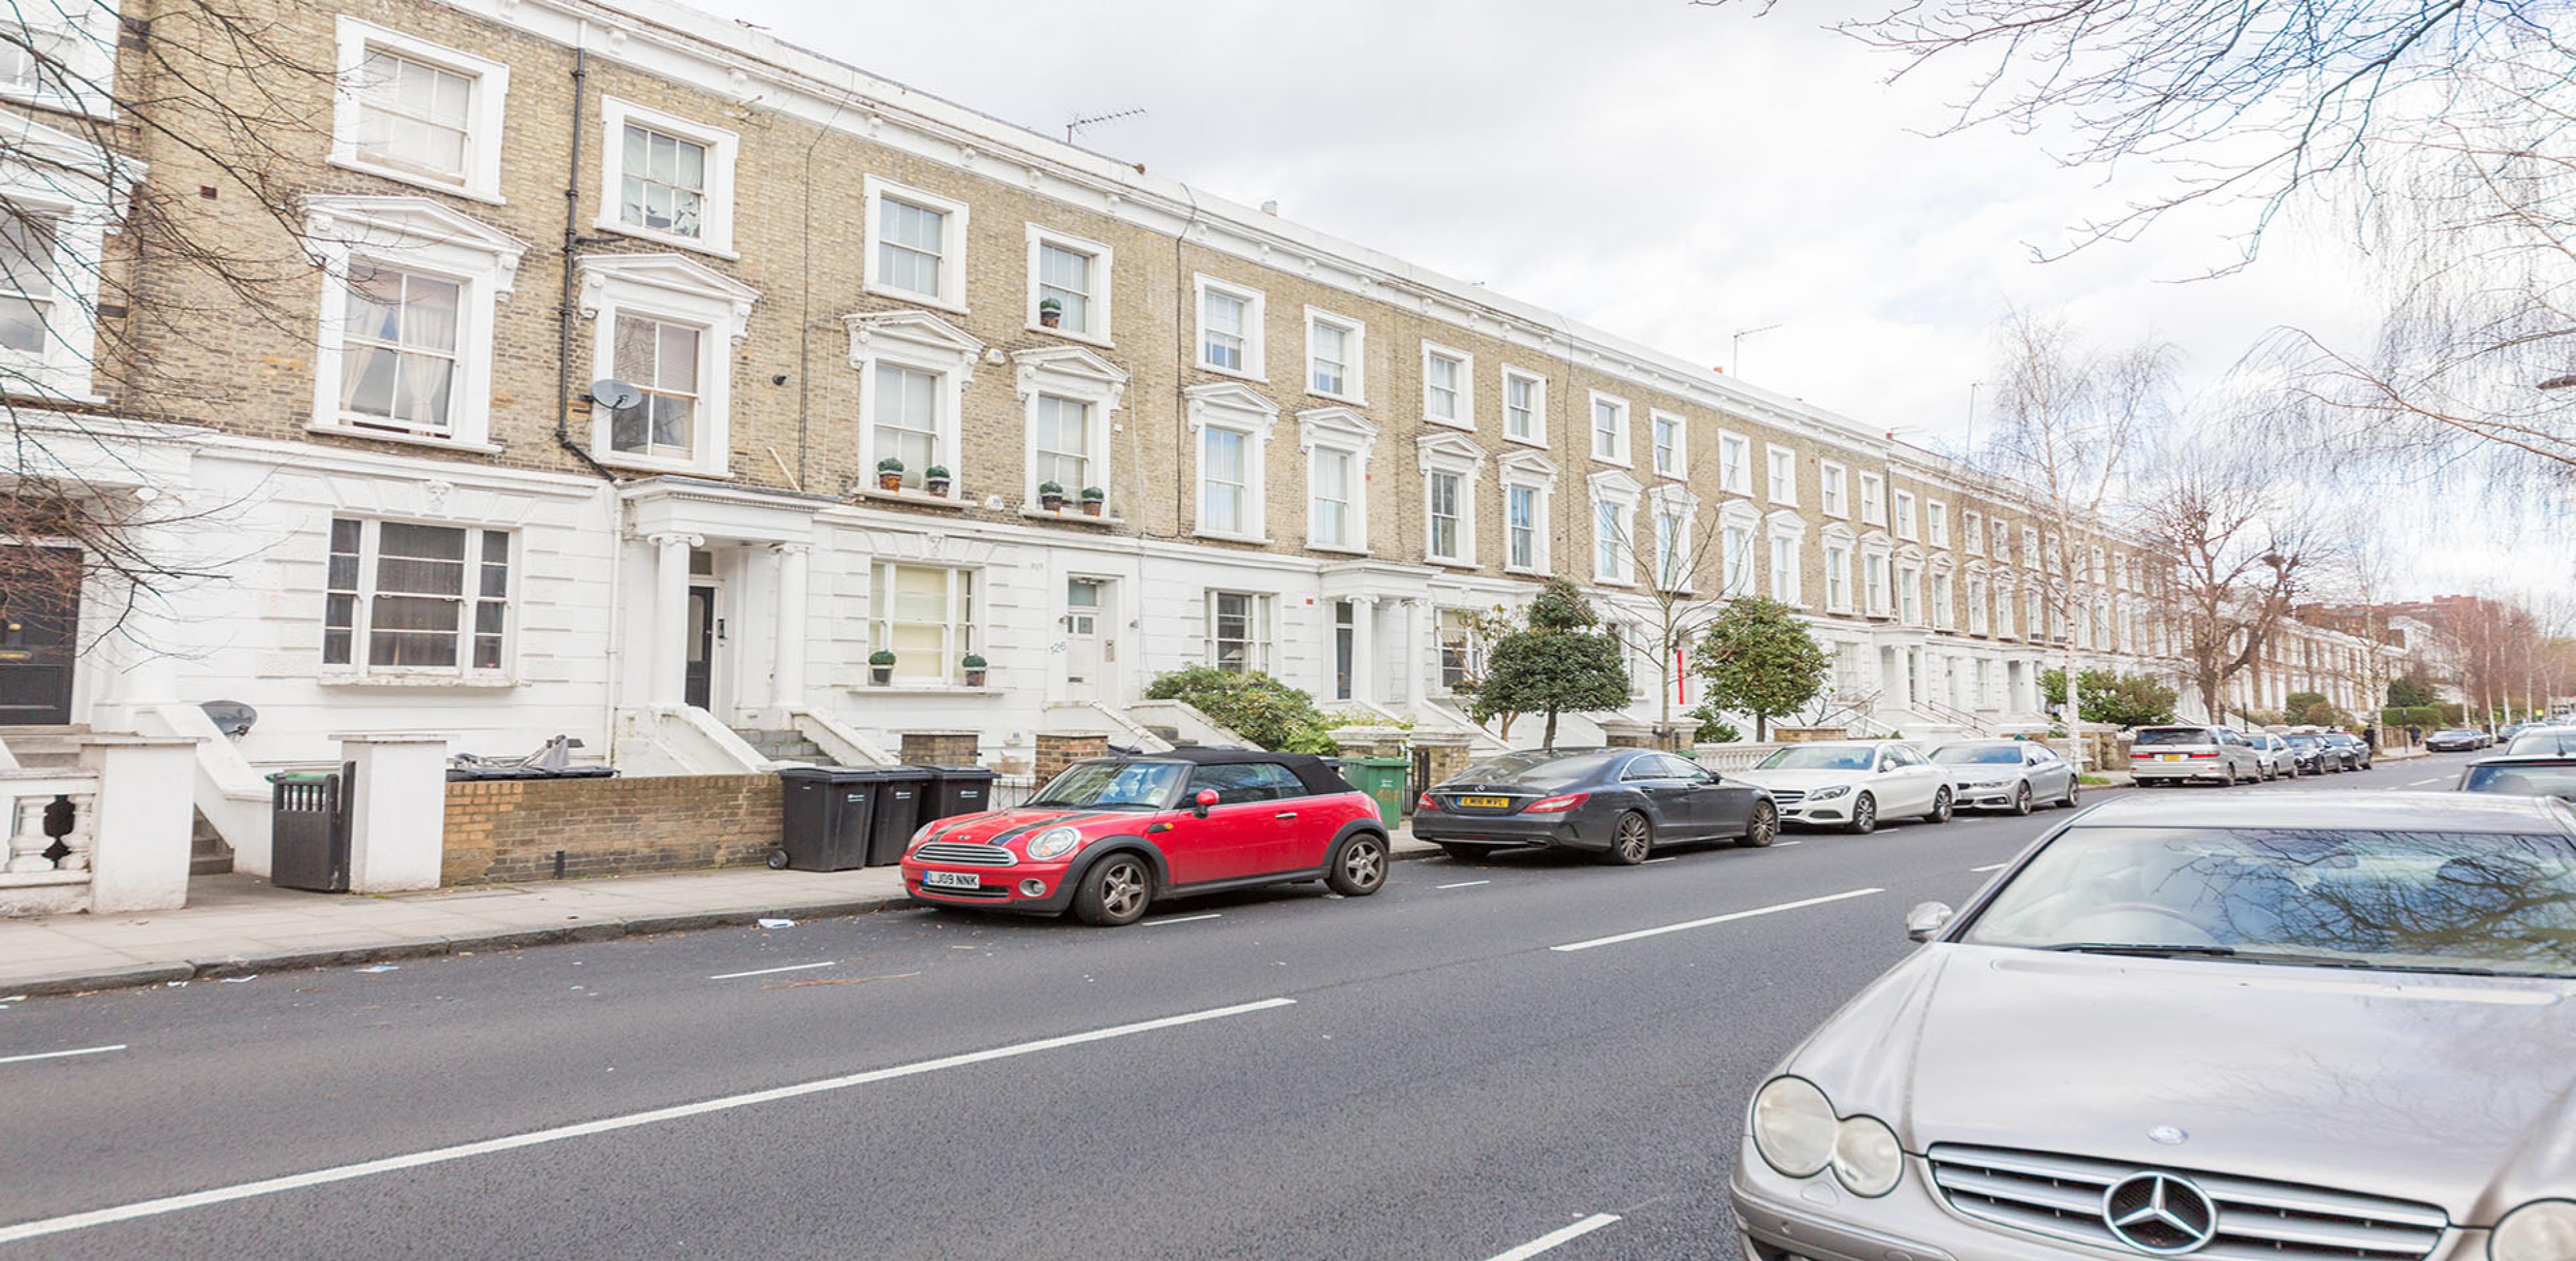 			5 Bedroom, 2 bath, 1 reception Apartment			 Belsize Road, South Hampstead NW6